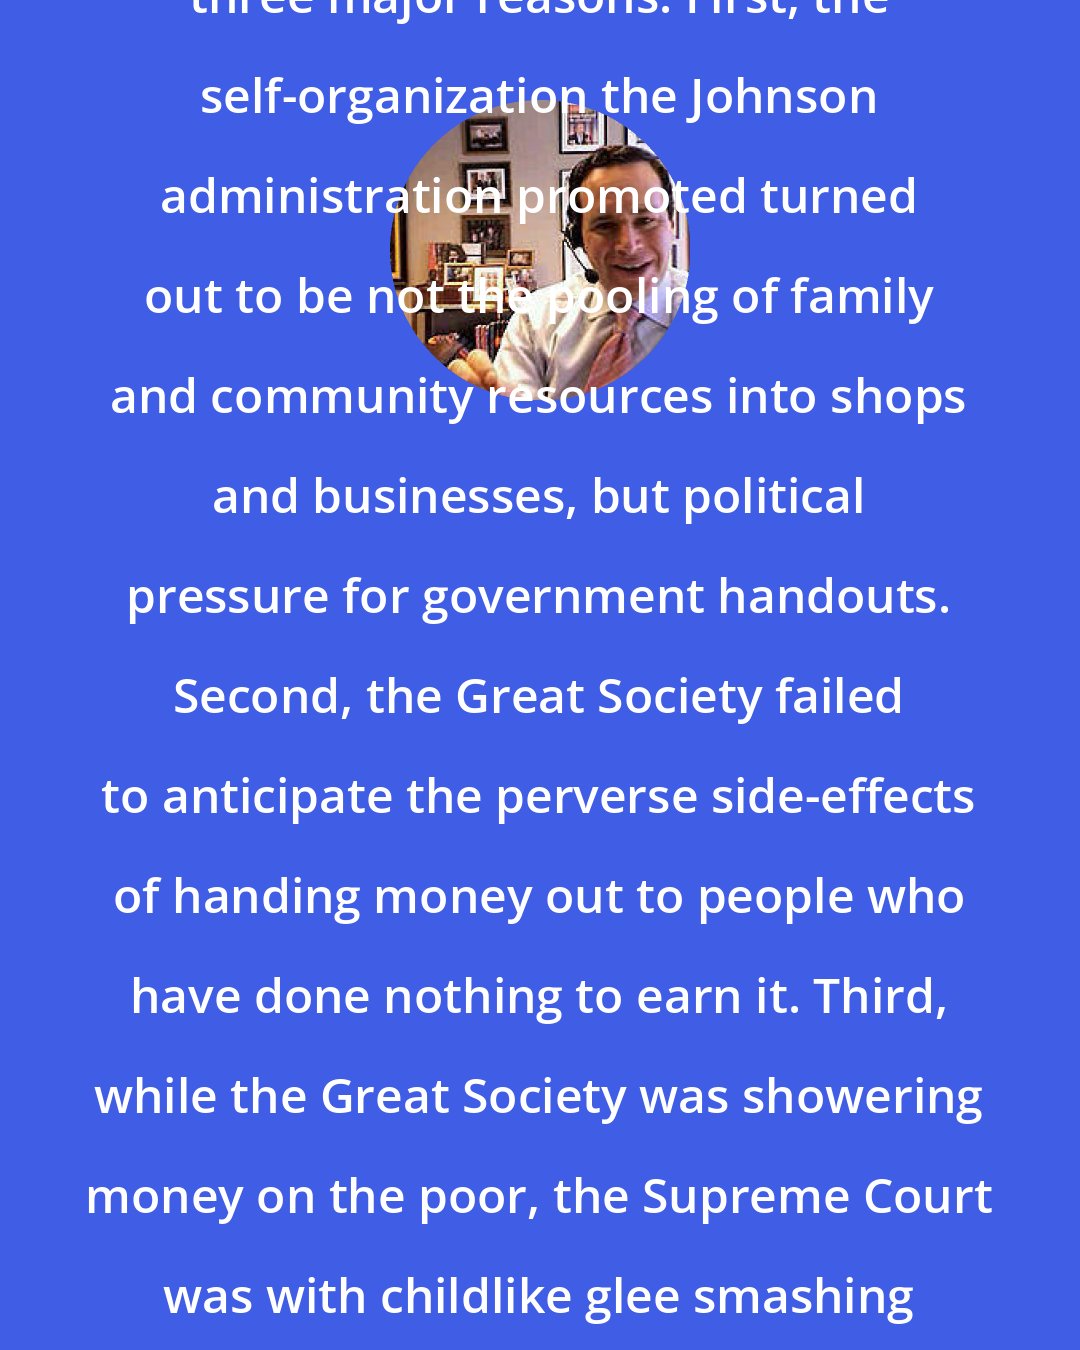 David Frum: The Great Society went wrong for three major reasons. First, the self-organization the Johnson administration promoted turned out to be not the pooling of family and community resources into shops and businesses, but political pressure for government handouts. Second, the Great Society failed to anticipate the perverse side-effects of handing money out to people who have done nothing to earn it. Third, while the Great Society was showering money on the poor, the Supreme Court was with childlike glee smashing to bits traditional methods of maintaining law and order.